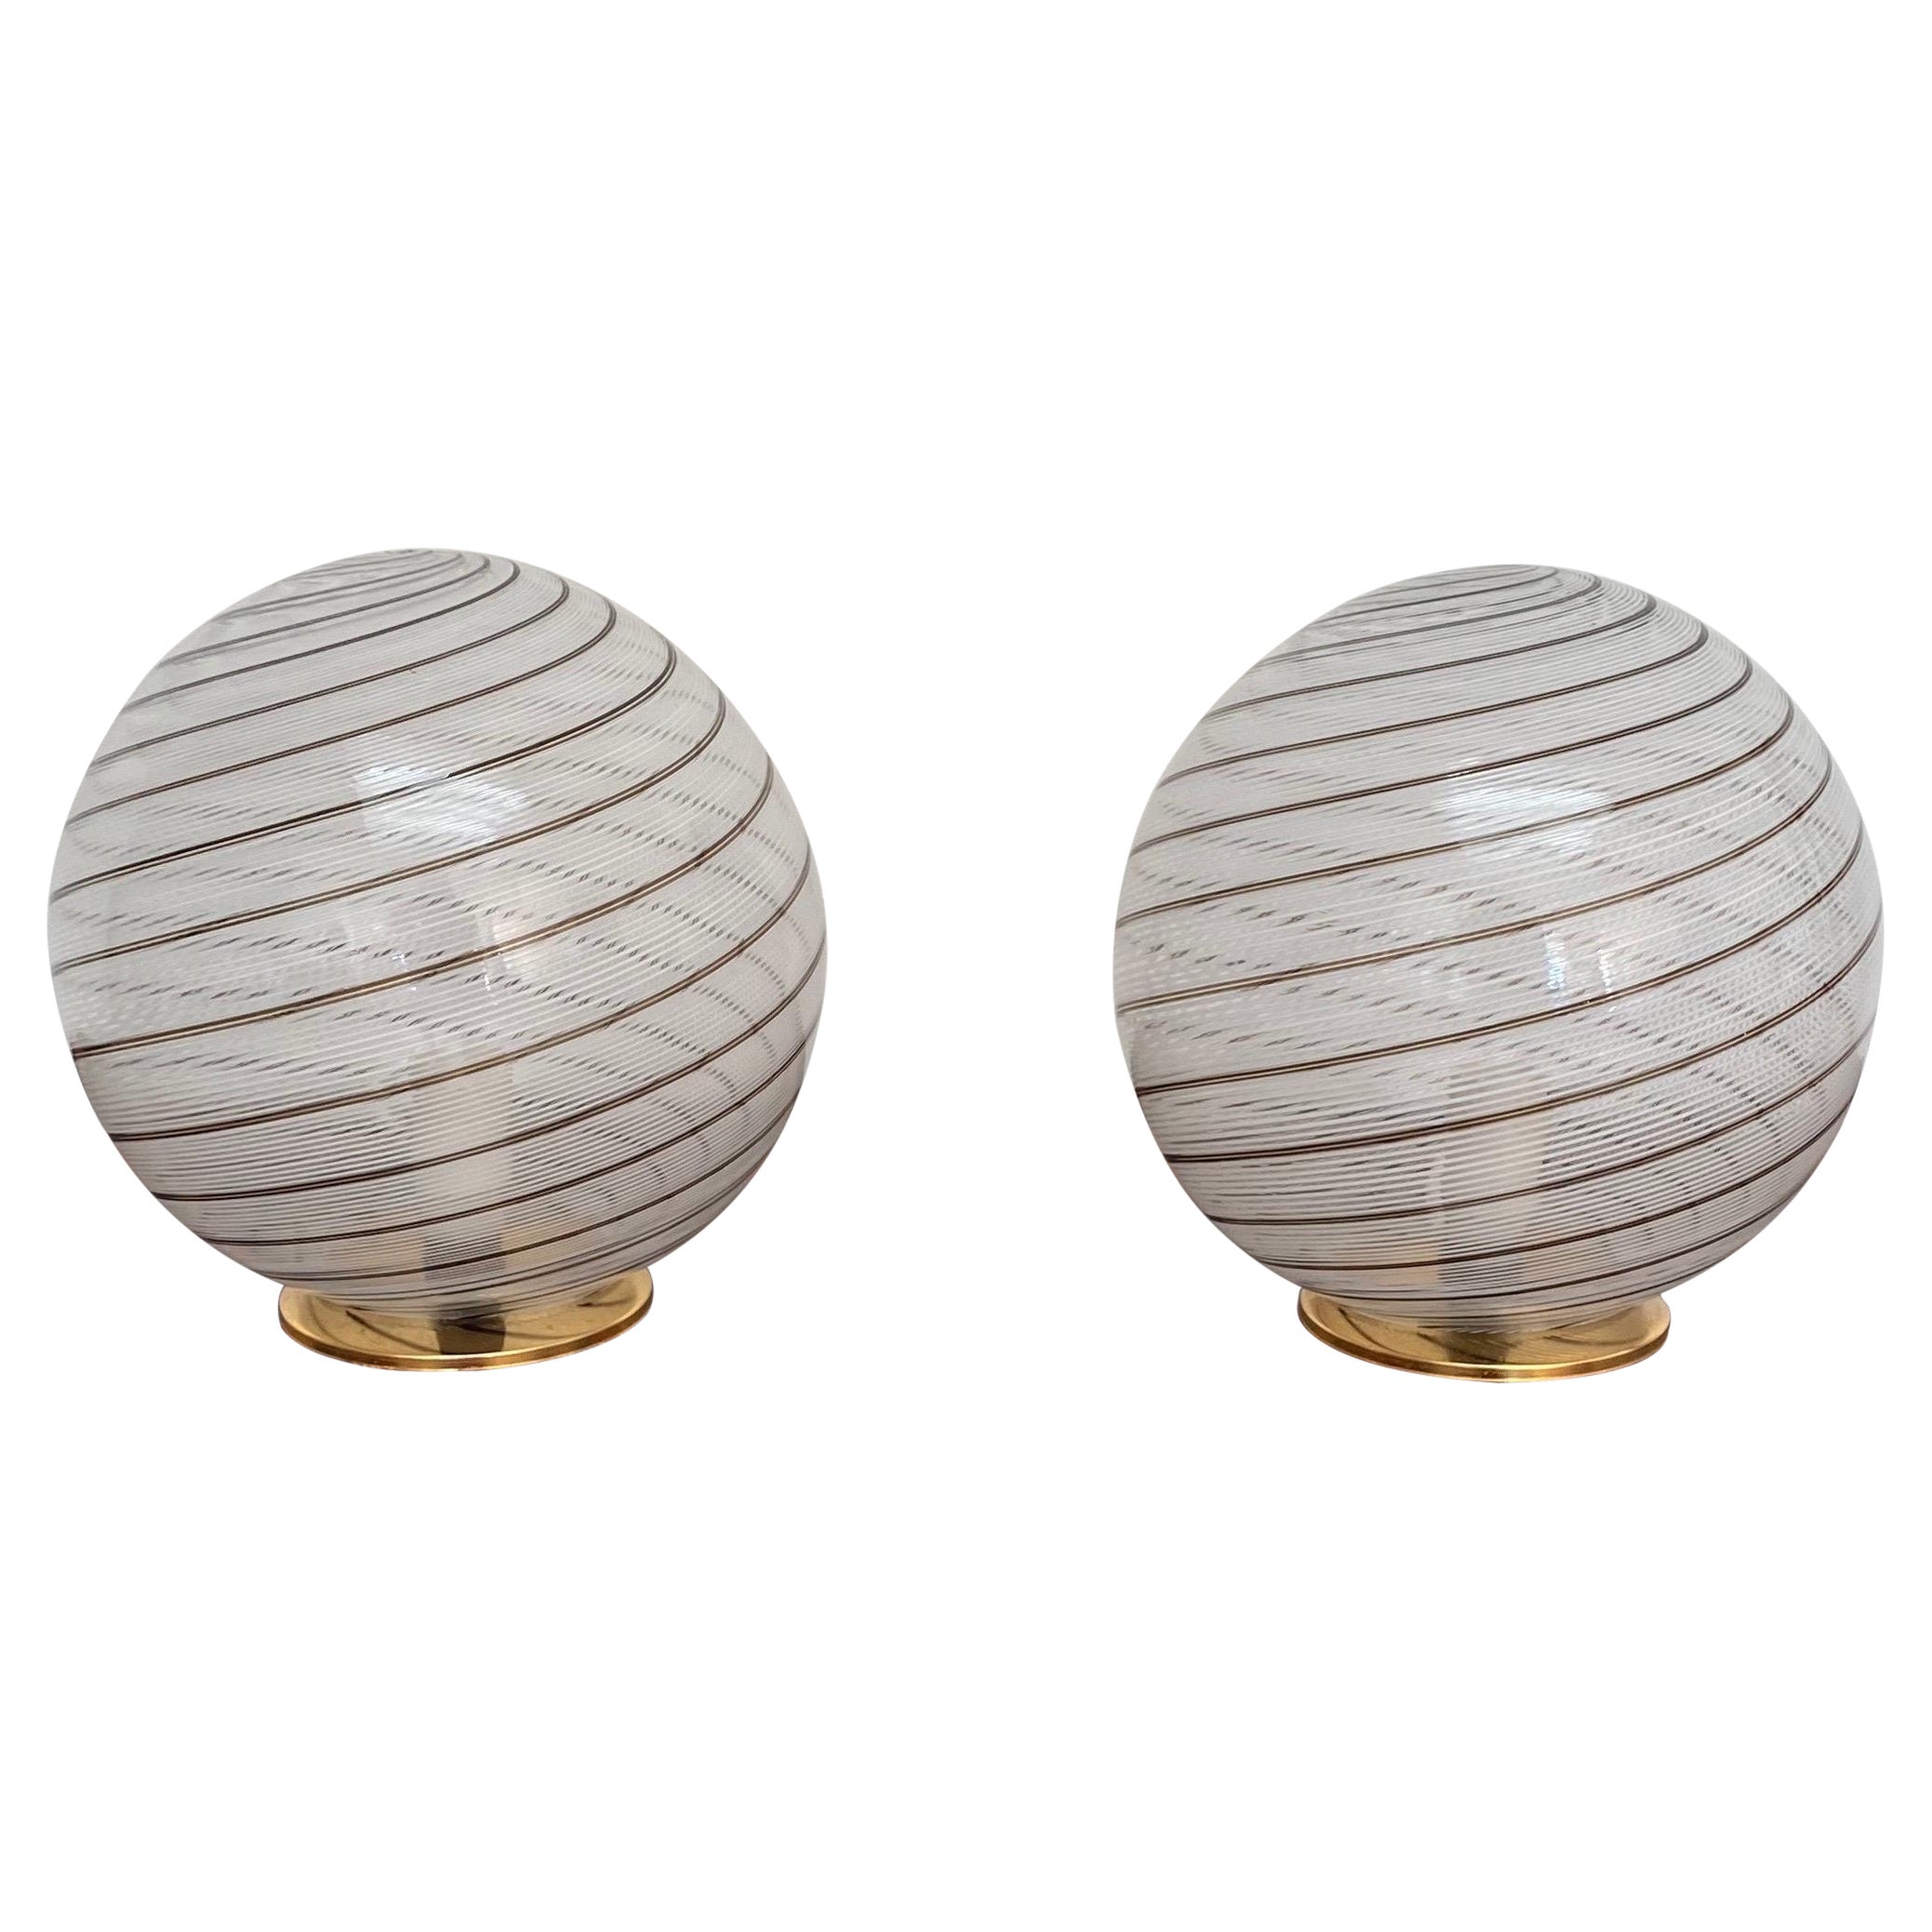 Pair of Mid-Century Modern Table Lamps Attributed to Venini, Murano, circa 1970